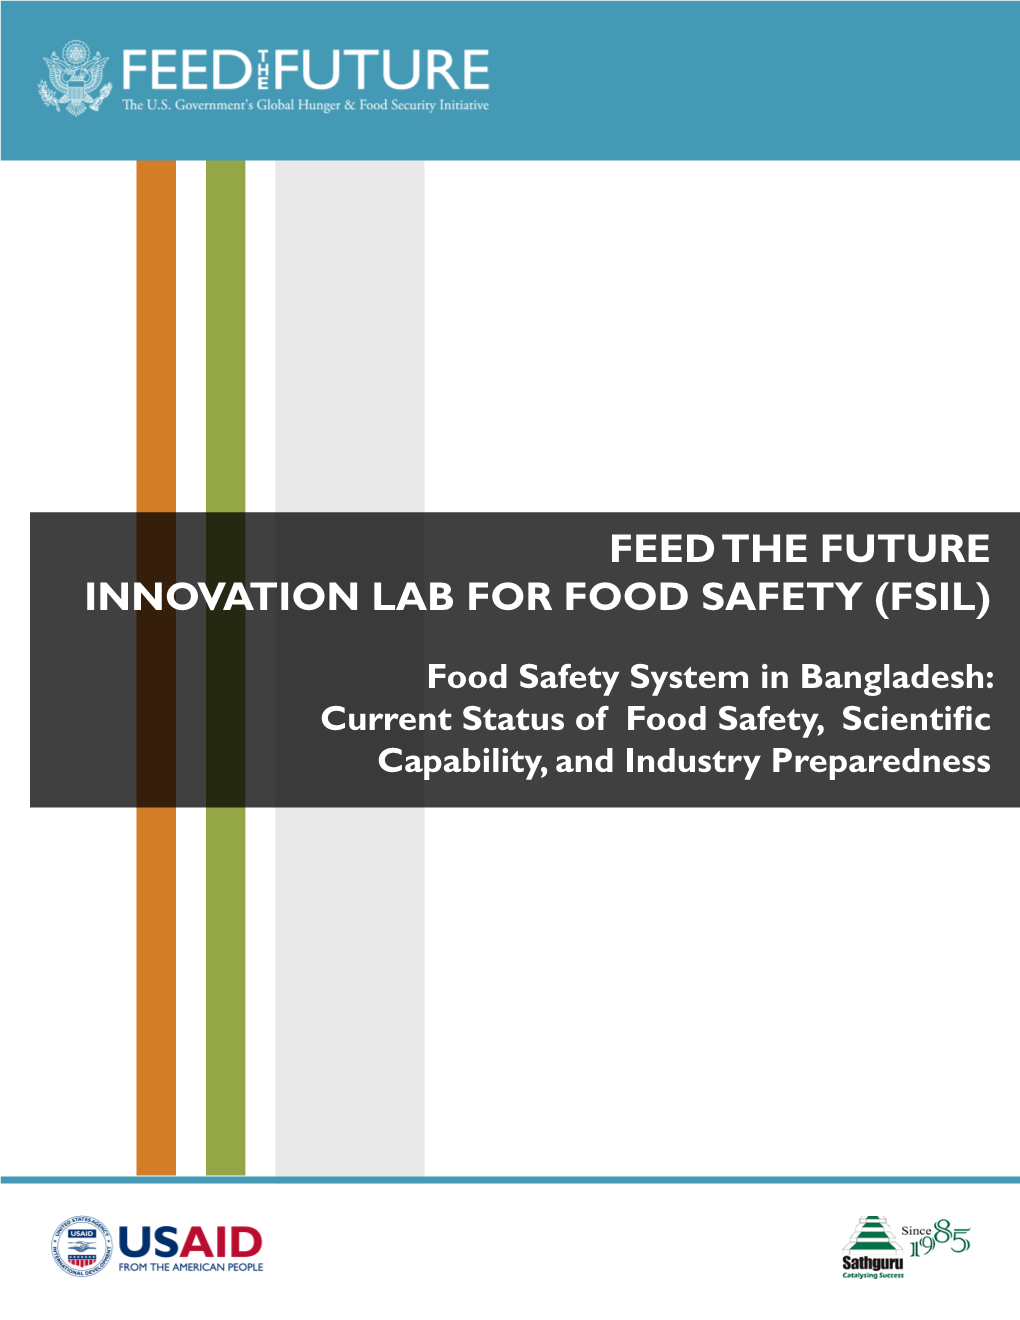 Food Safety System in Bangladesh